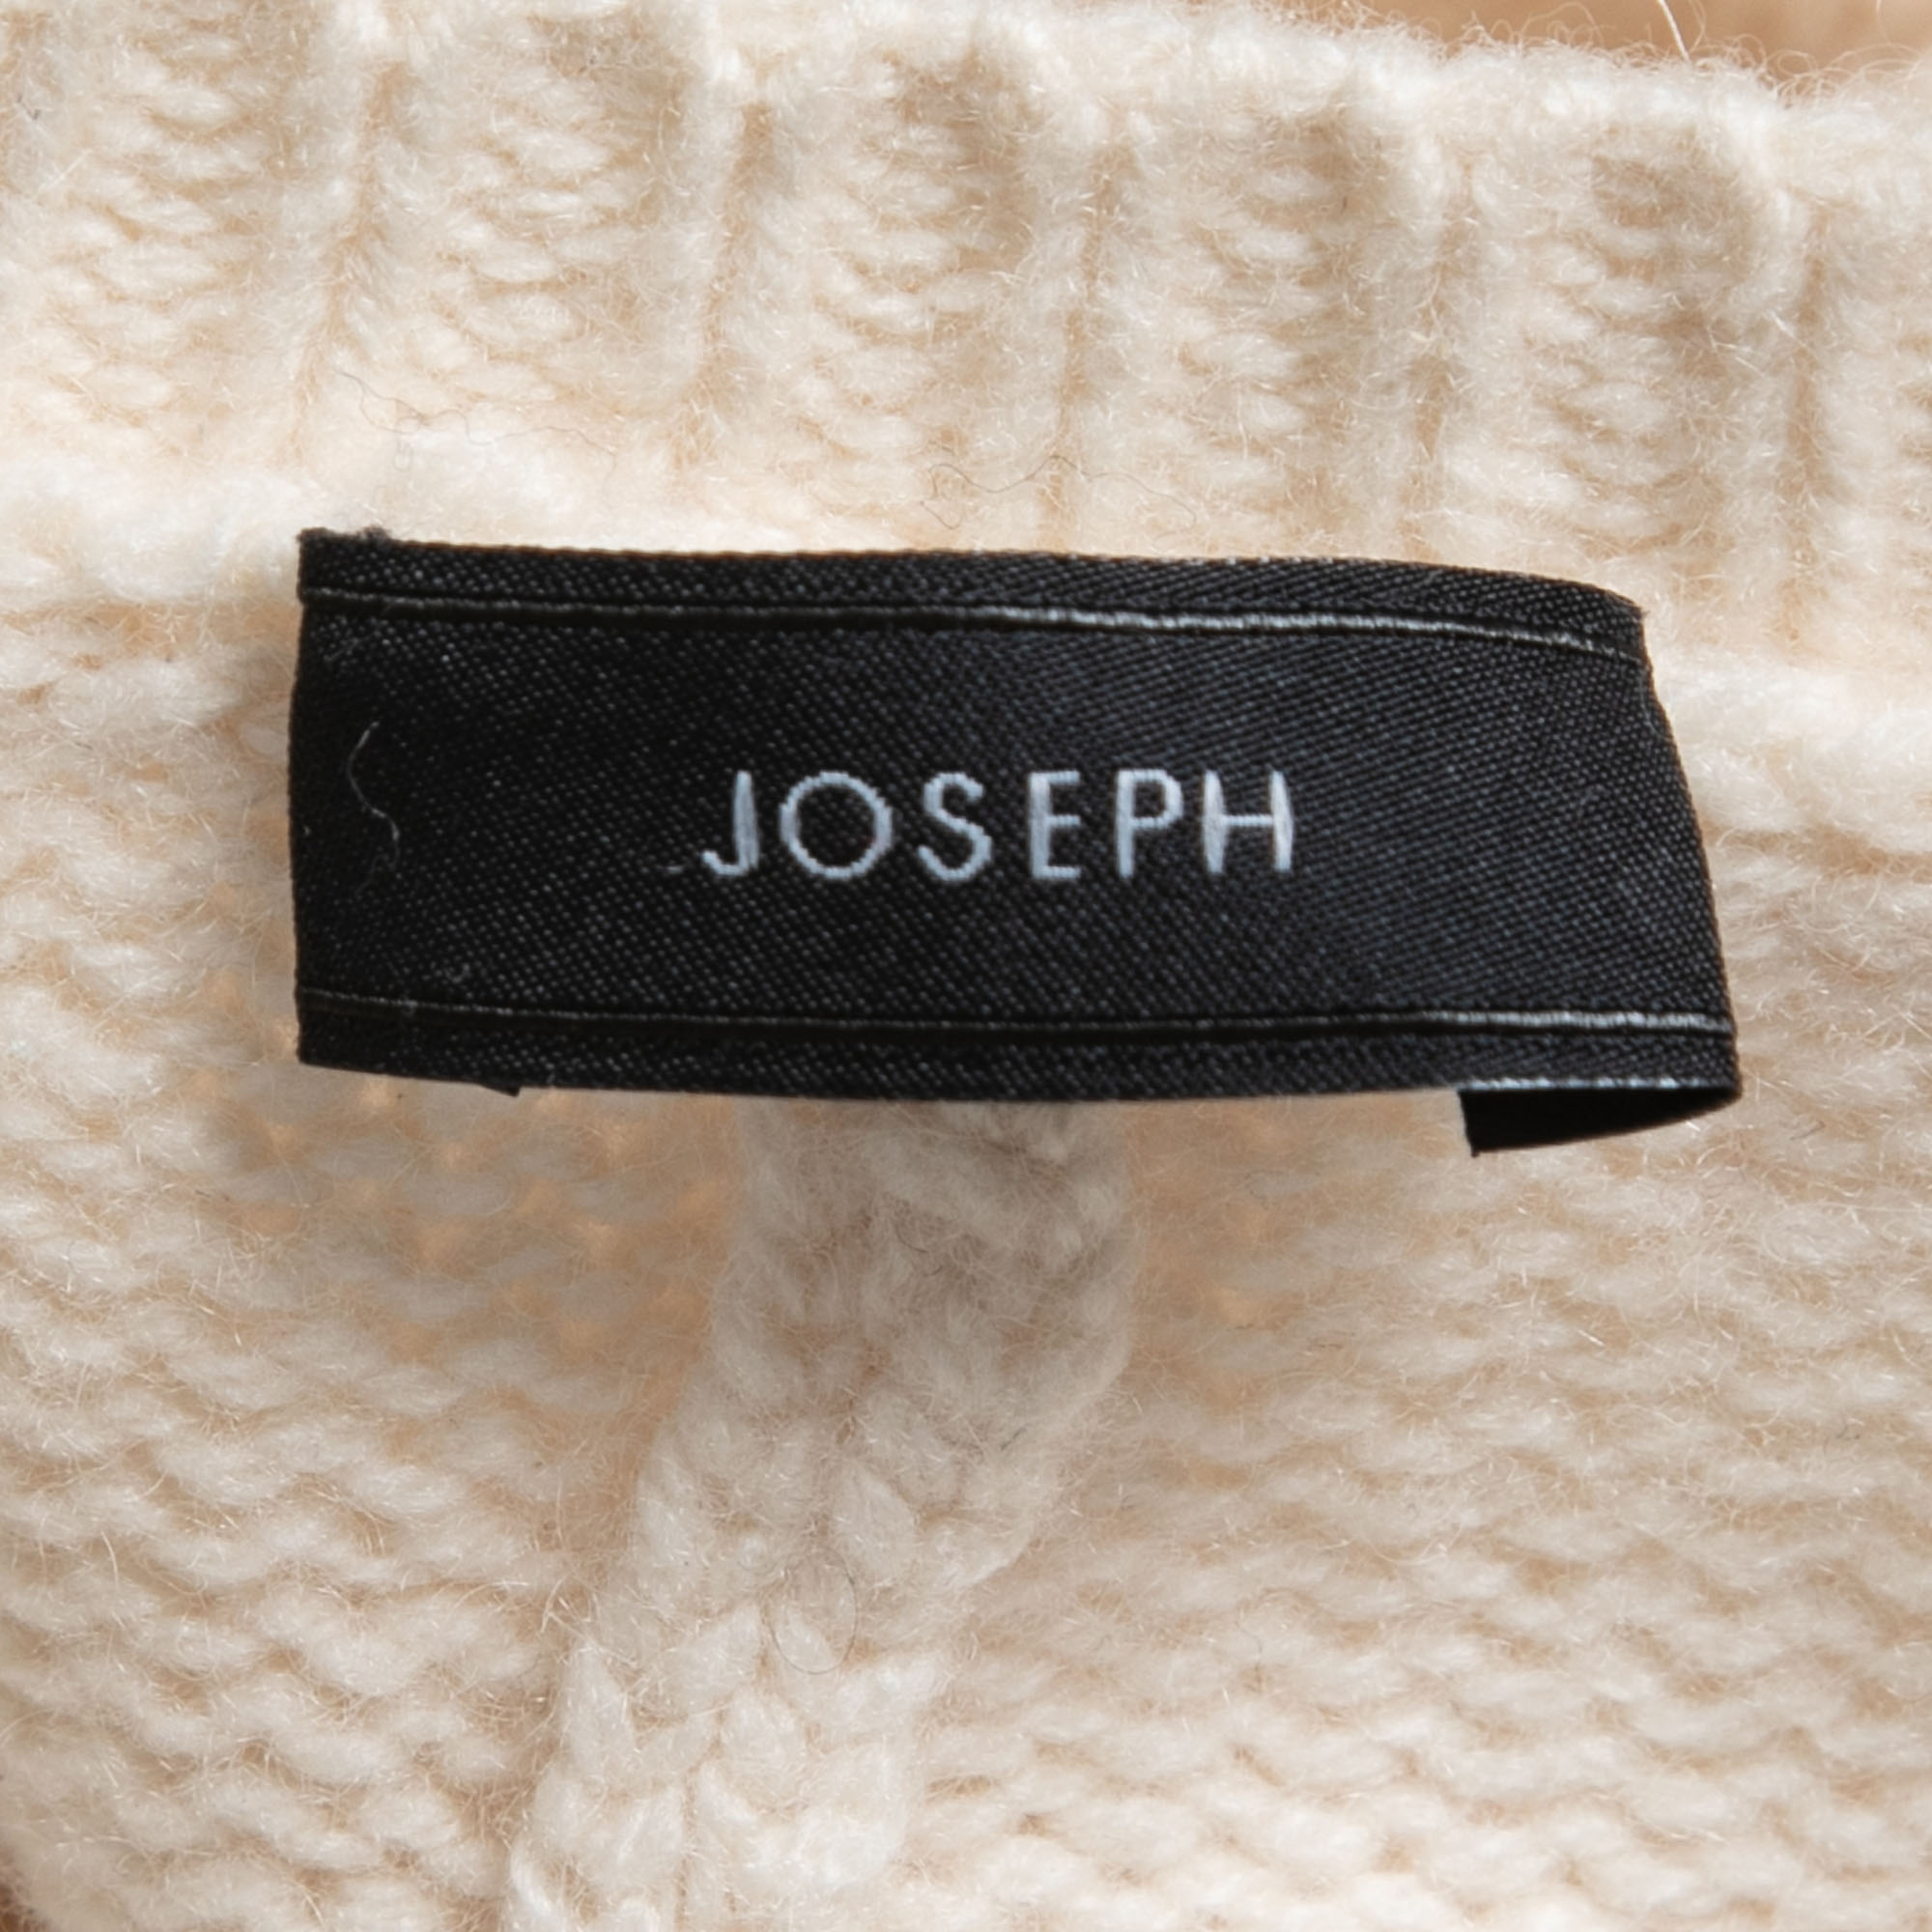 Joseph Cream Cashmere Belted Long Felicie Sweater XS